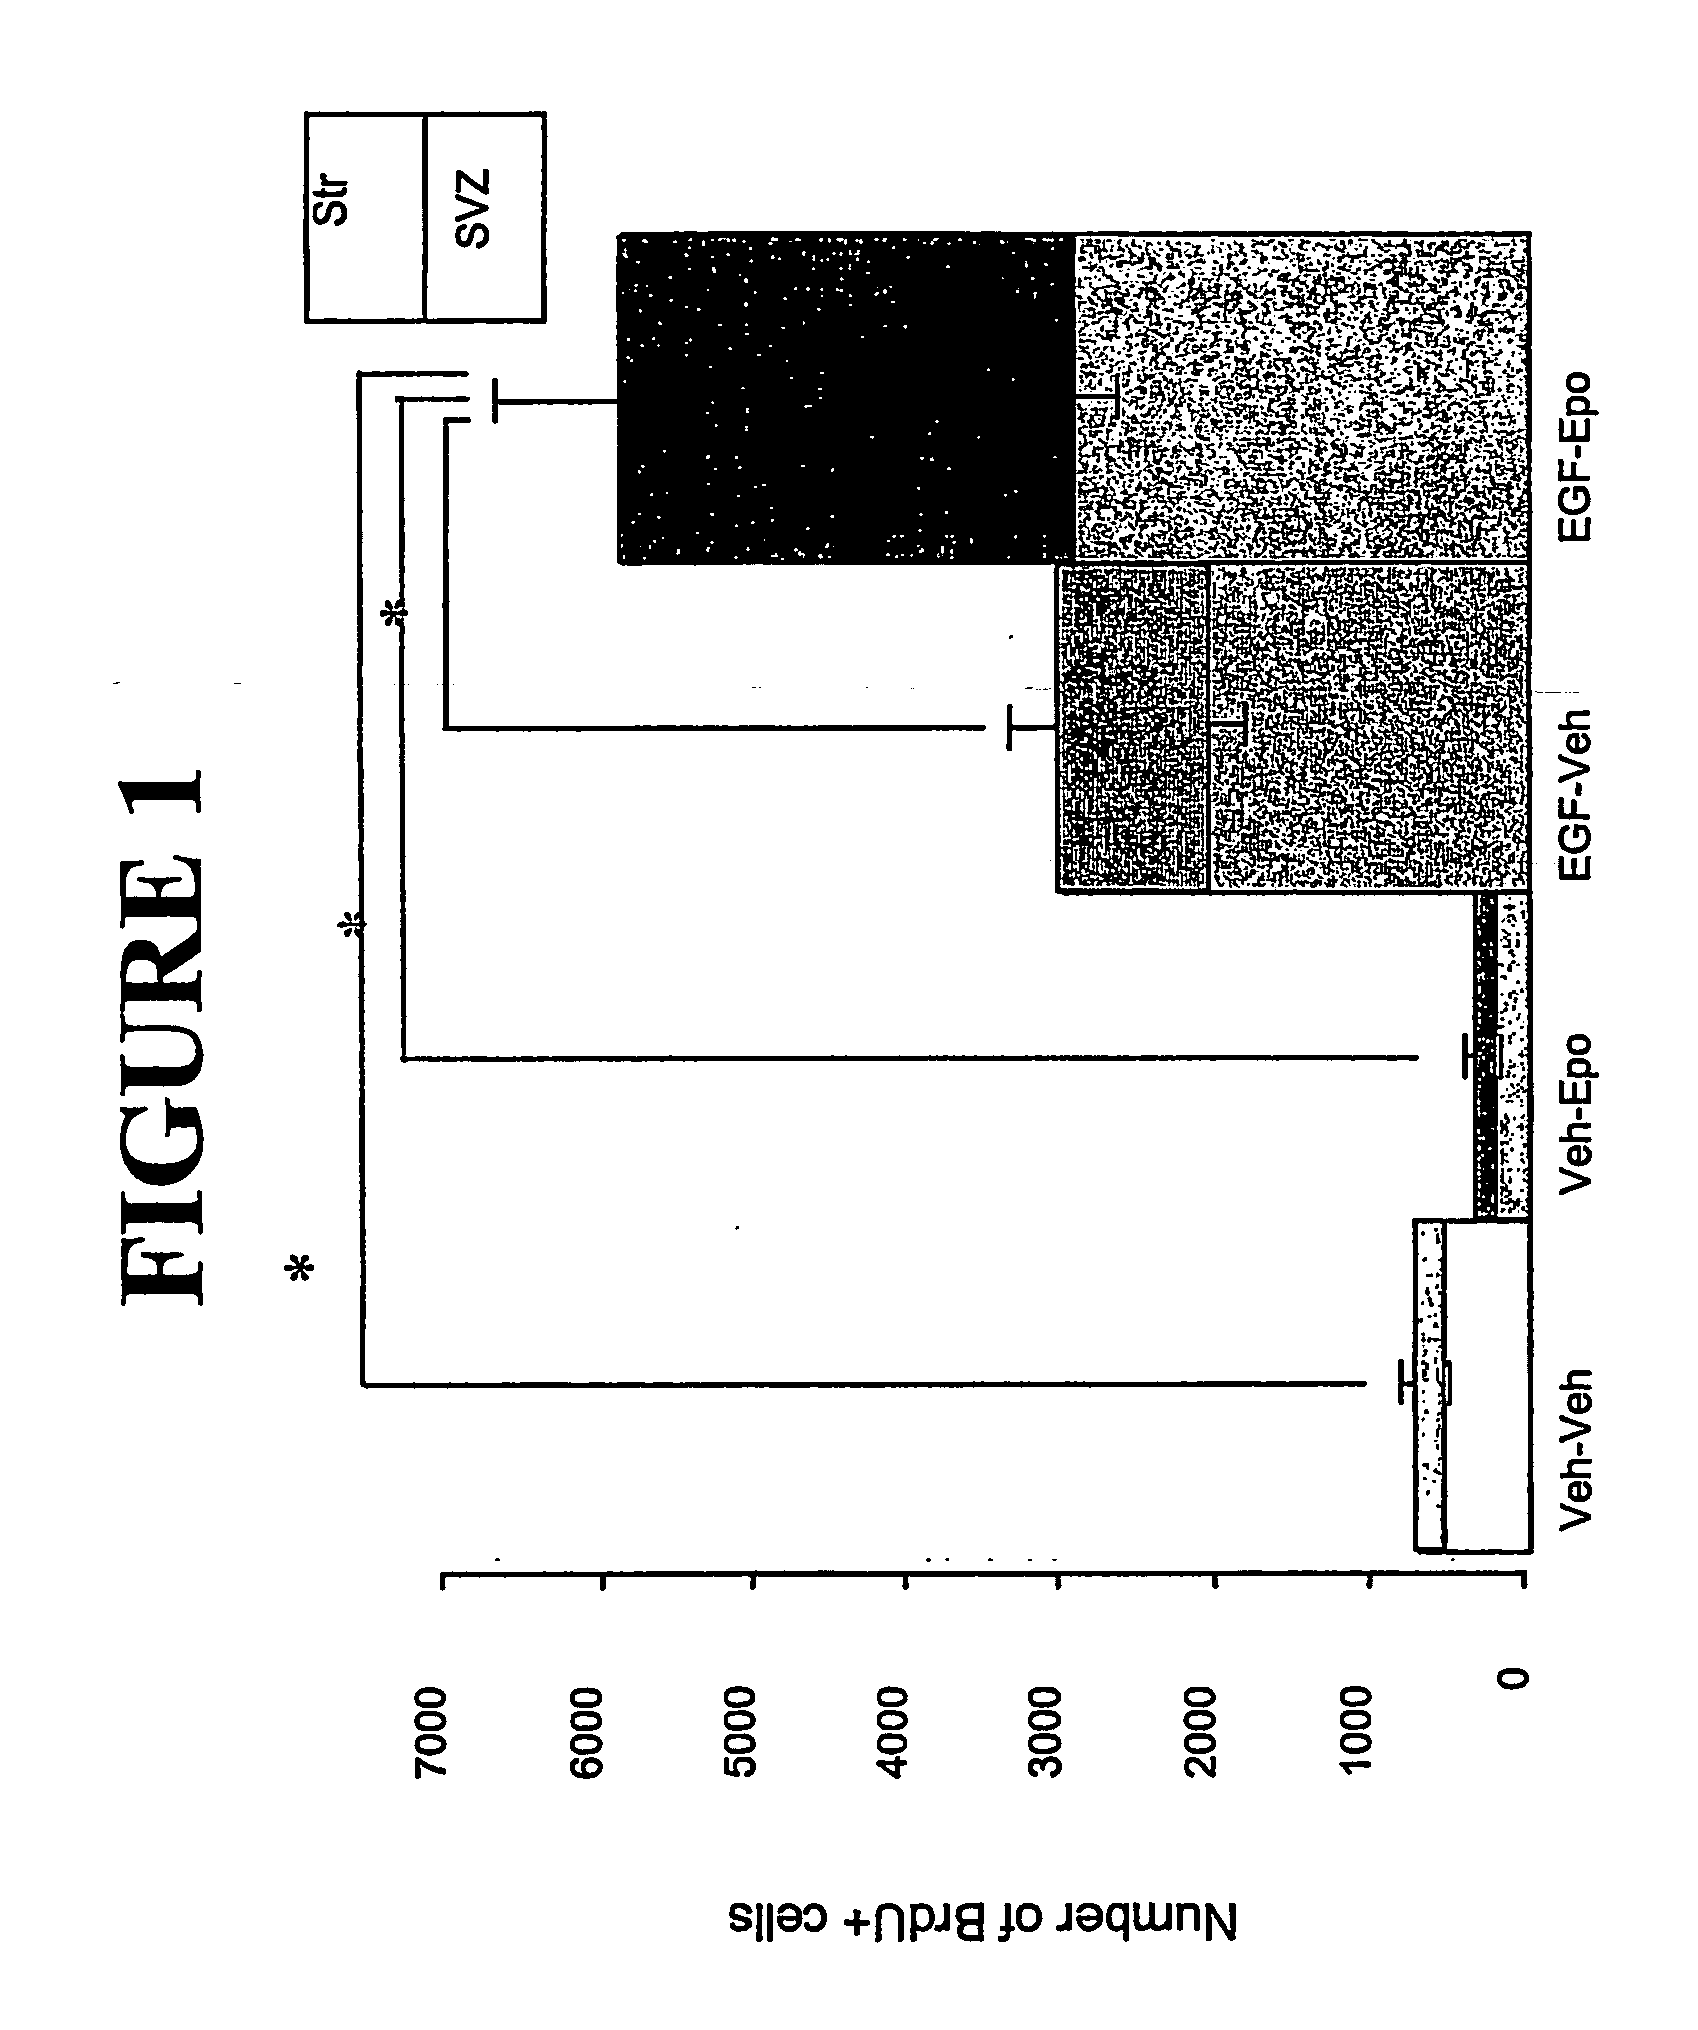 Method of enhancing and/or inducing neuronal migration using erythropoietin